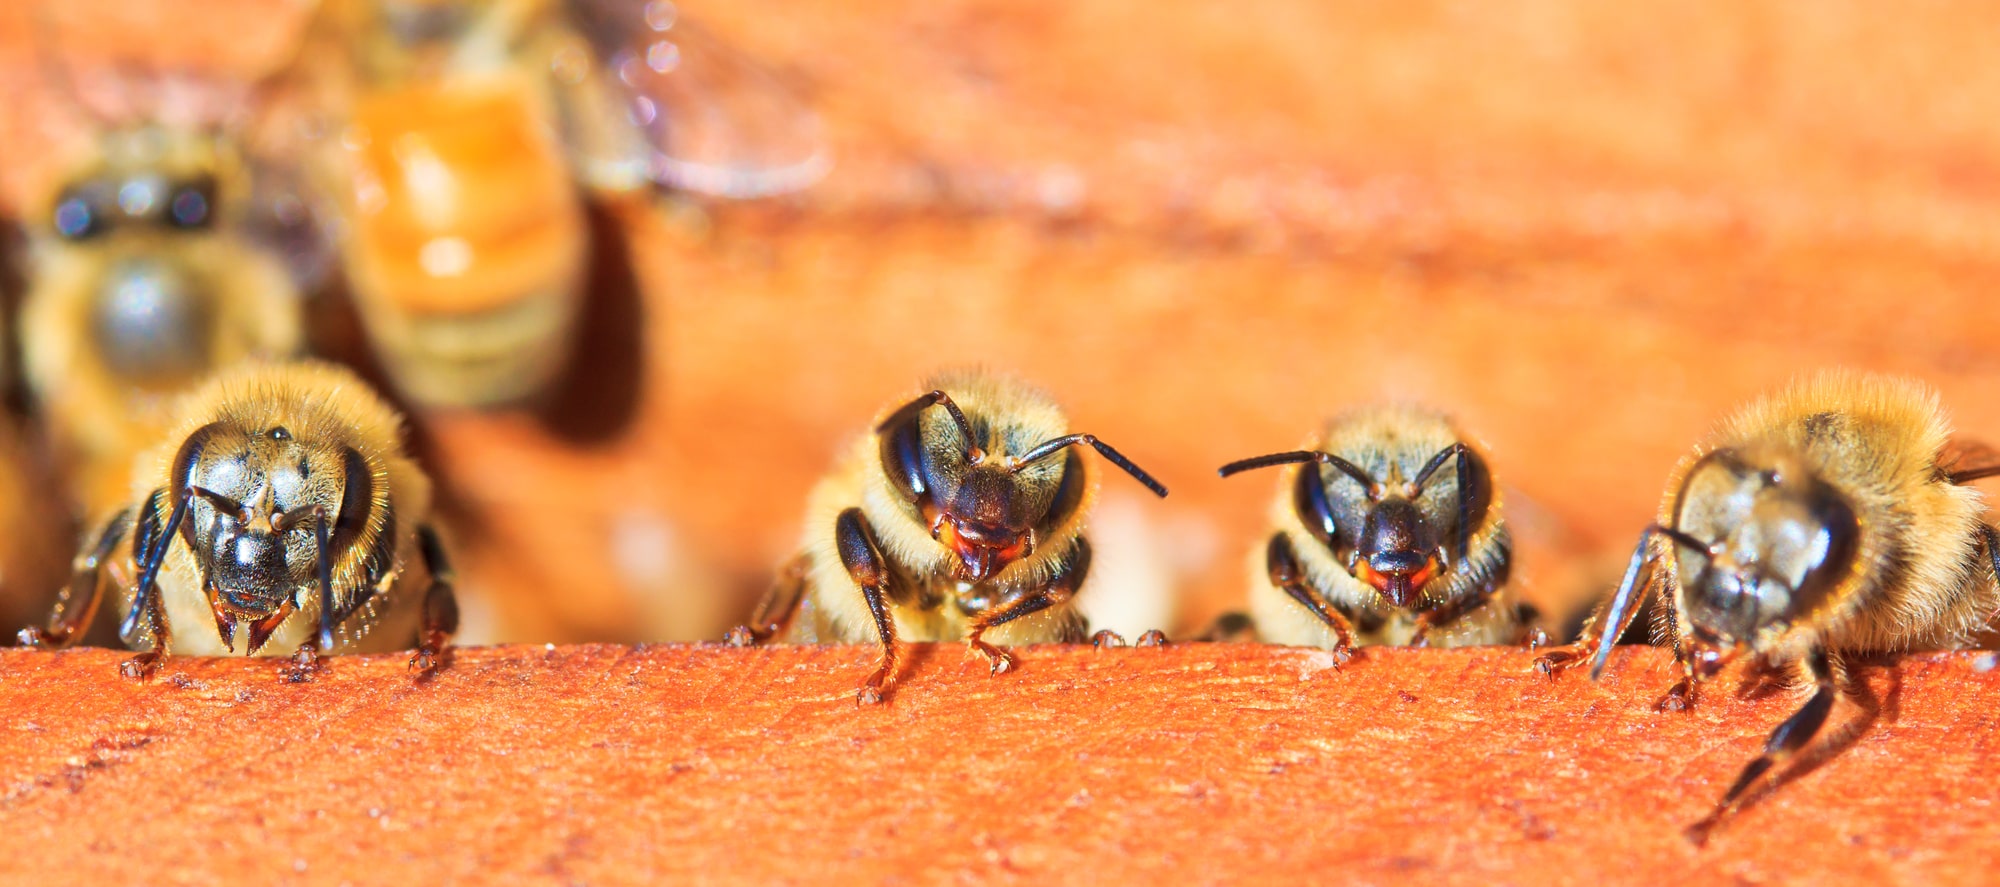 €65 thousand for killing a bee: a decision on how to save endangered bees